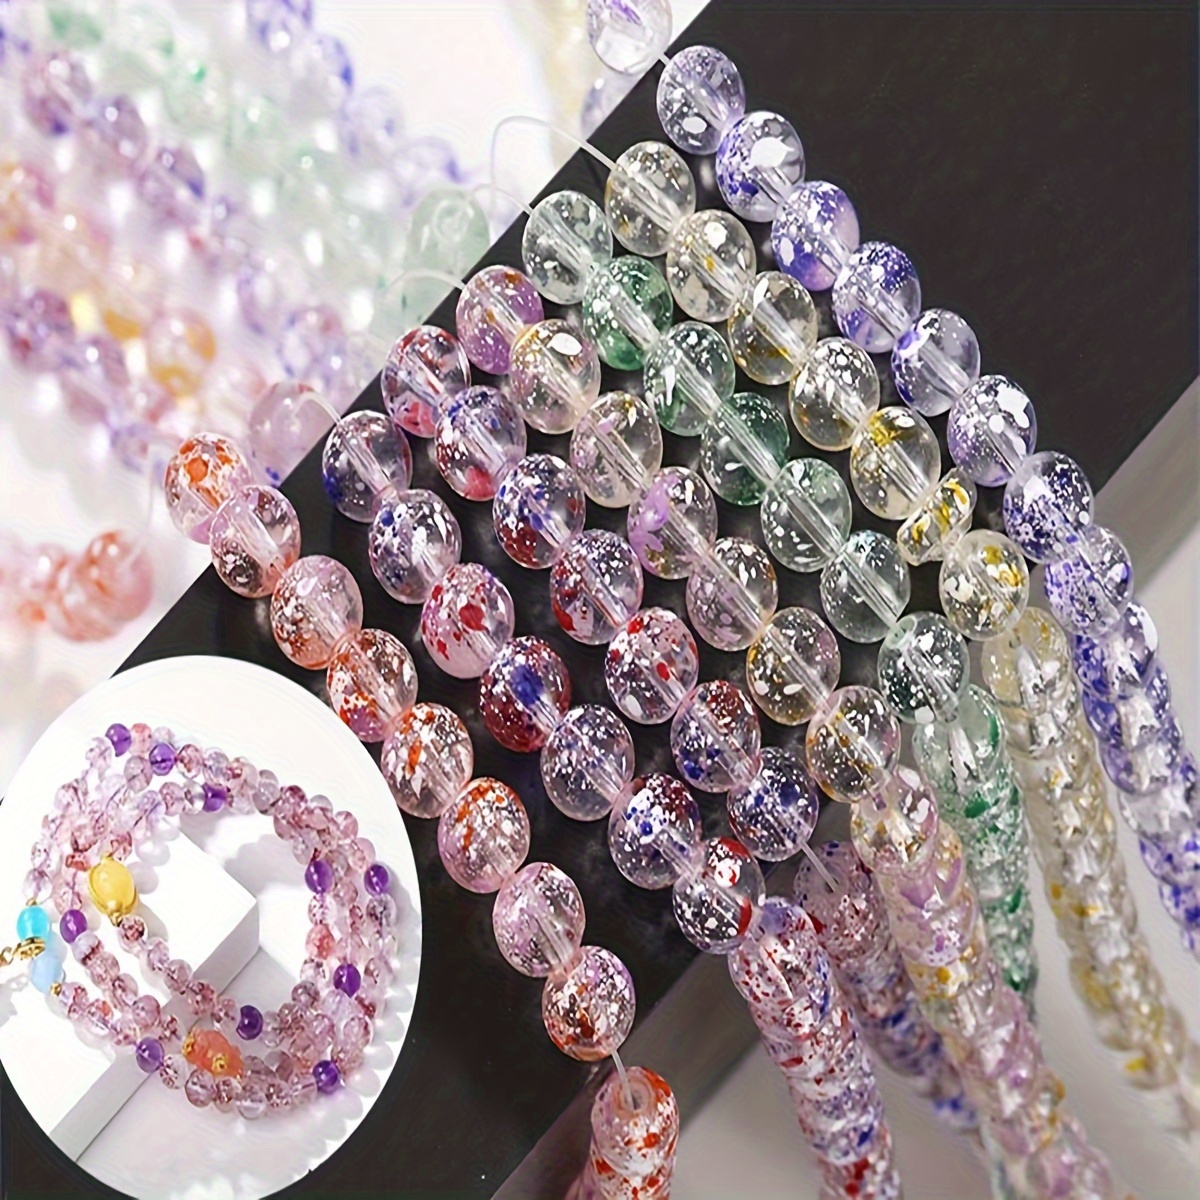 30Pcs Colorful Large Hole Copper Beads Glass Rhinestones Sun Flower Set  Beads For Jewelry Making Perfect DIY Bracelet Necklace Handmade Craft  Supplies